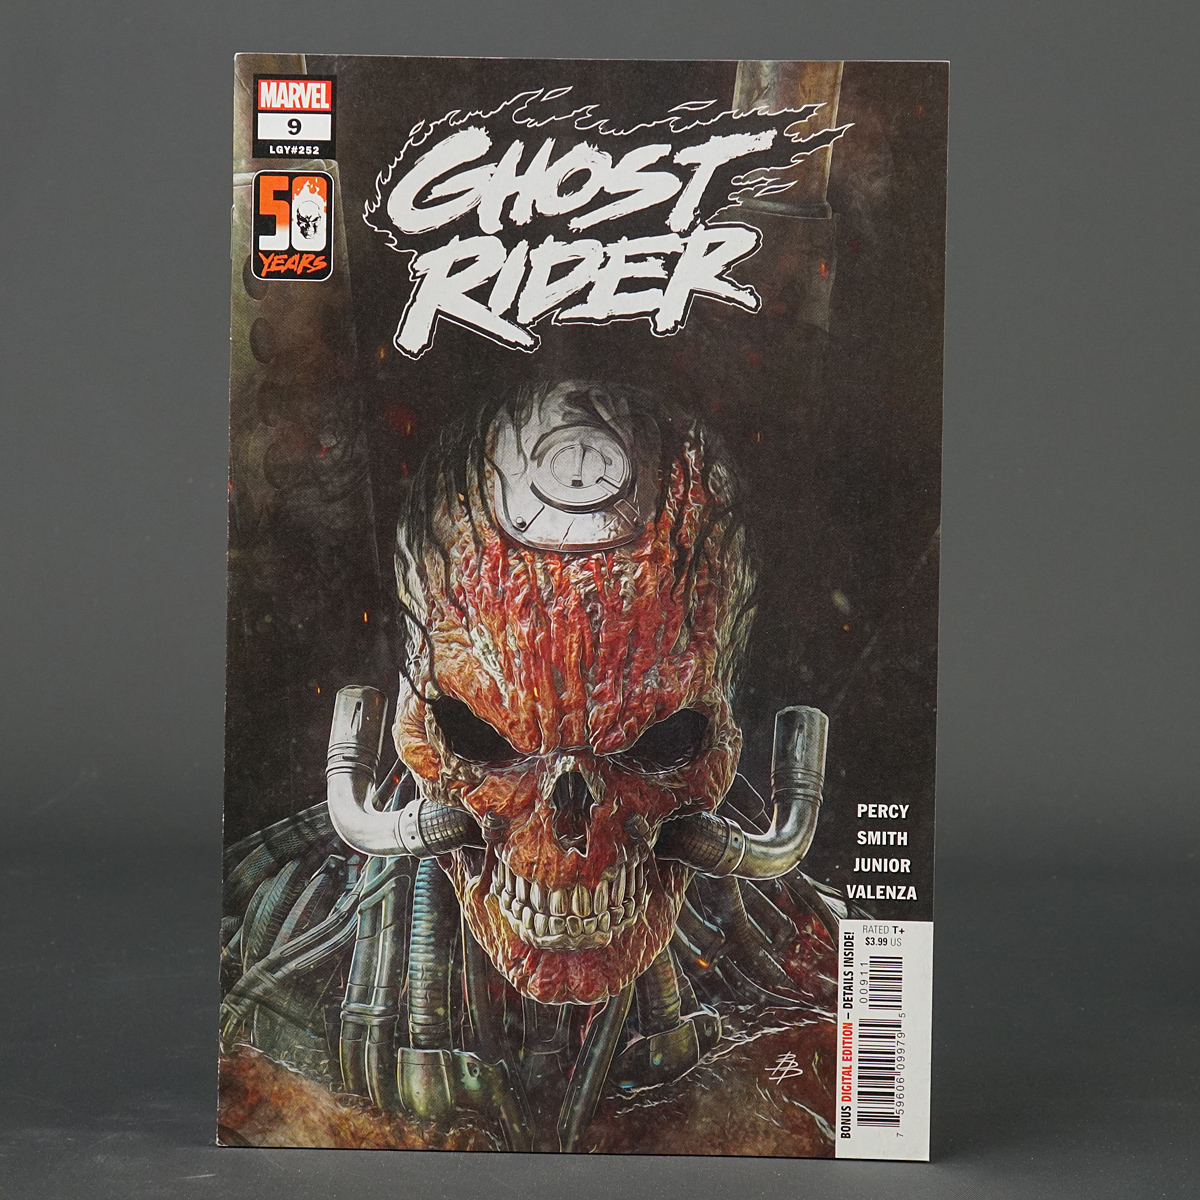 GHOST RIDER #9 Marvel Comics 2022 OCT220928 (CA) Barends (W) Percy (A) Smith